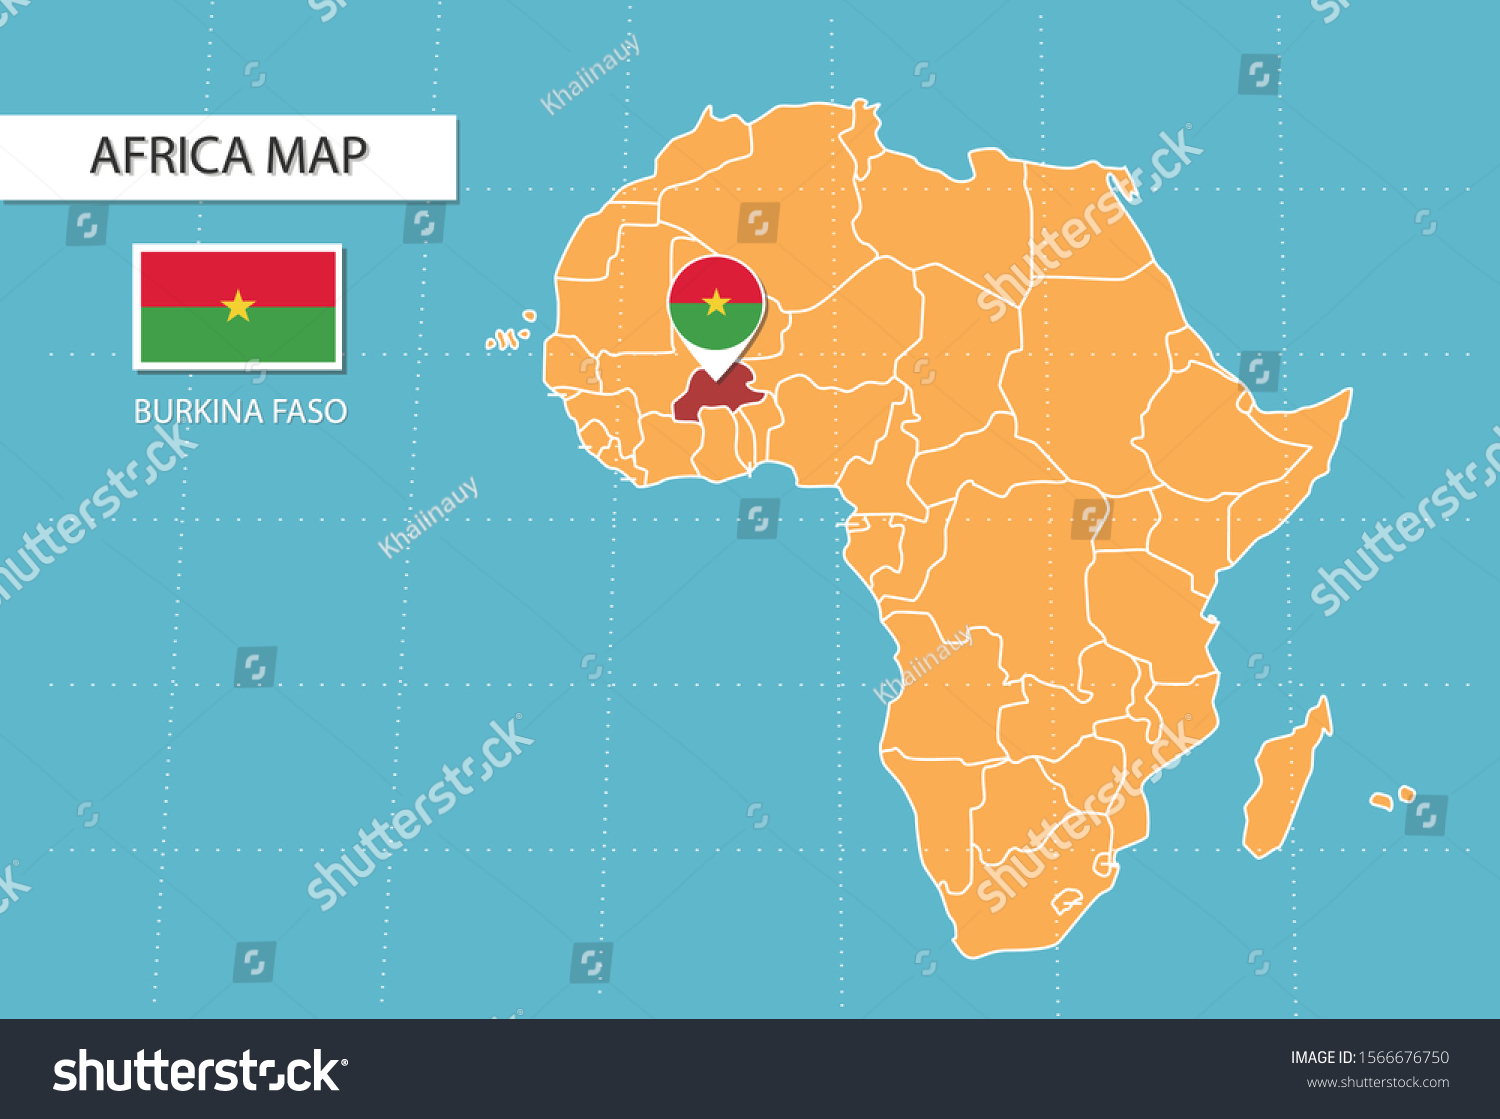 Burkina Faso Map Africa Icons Showing Stock Vector Royalty Free